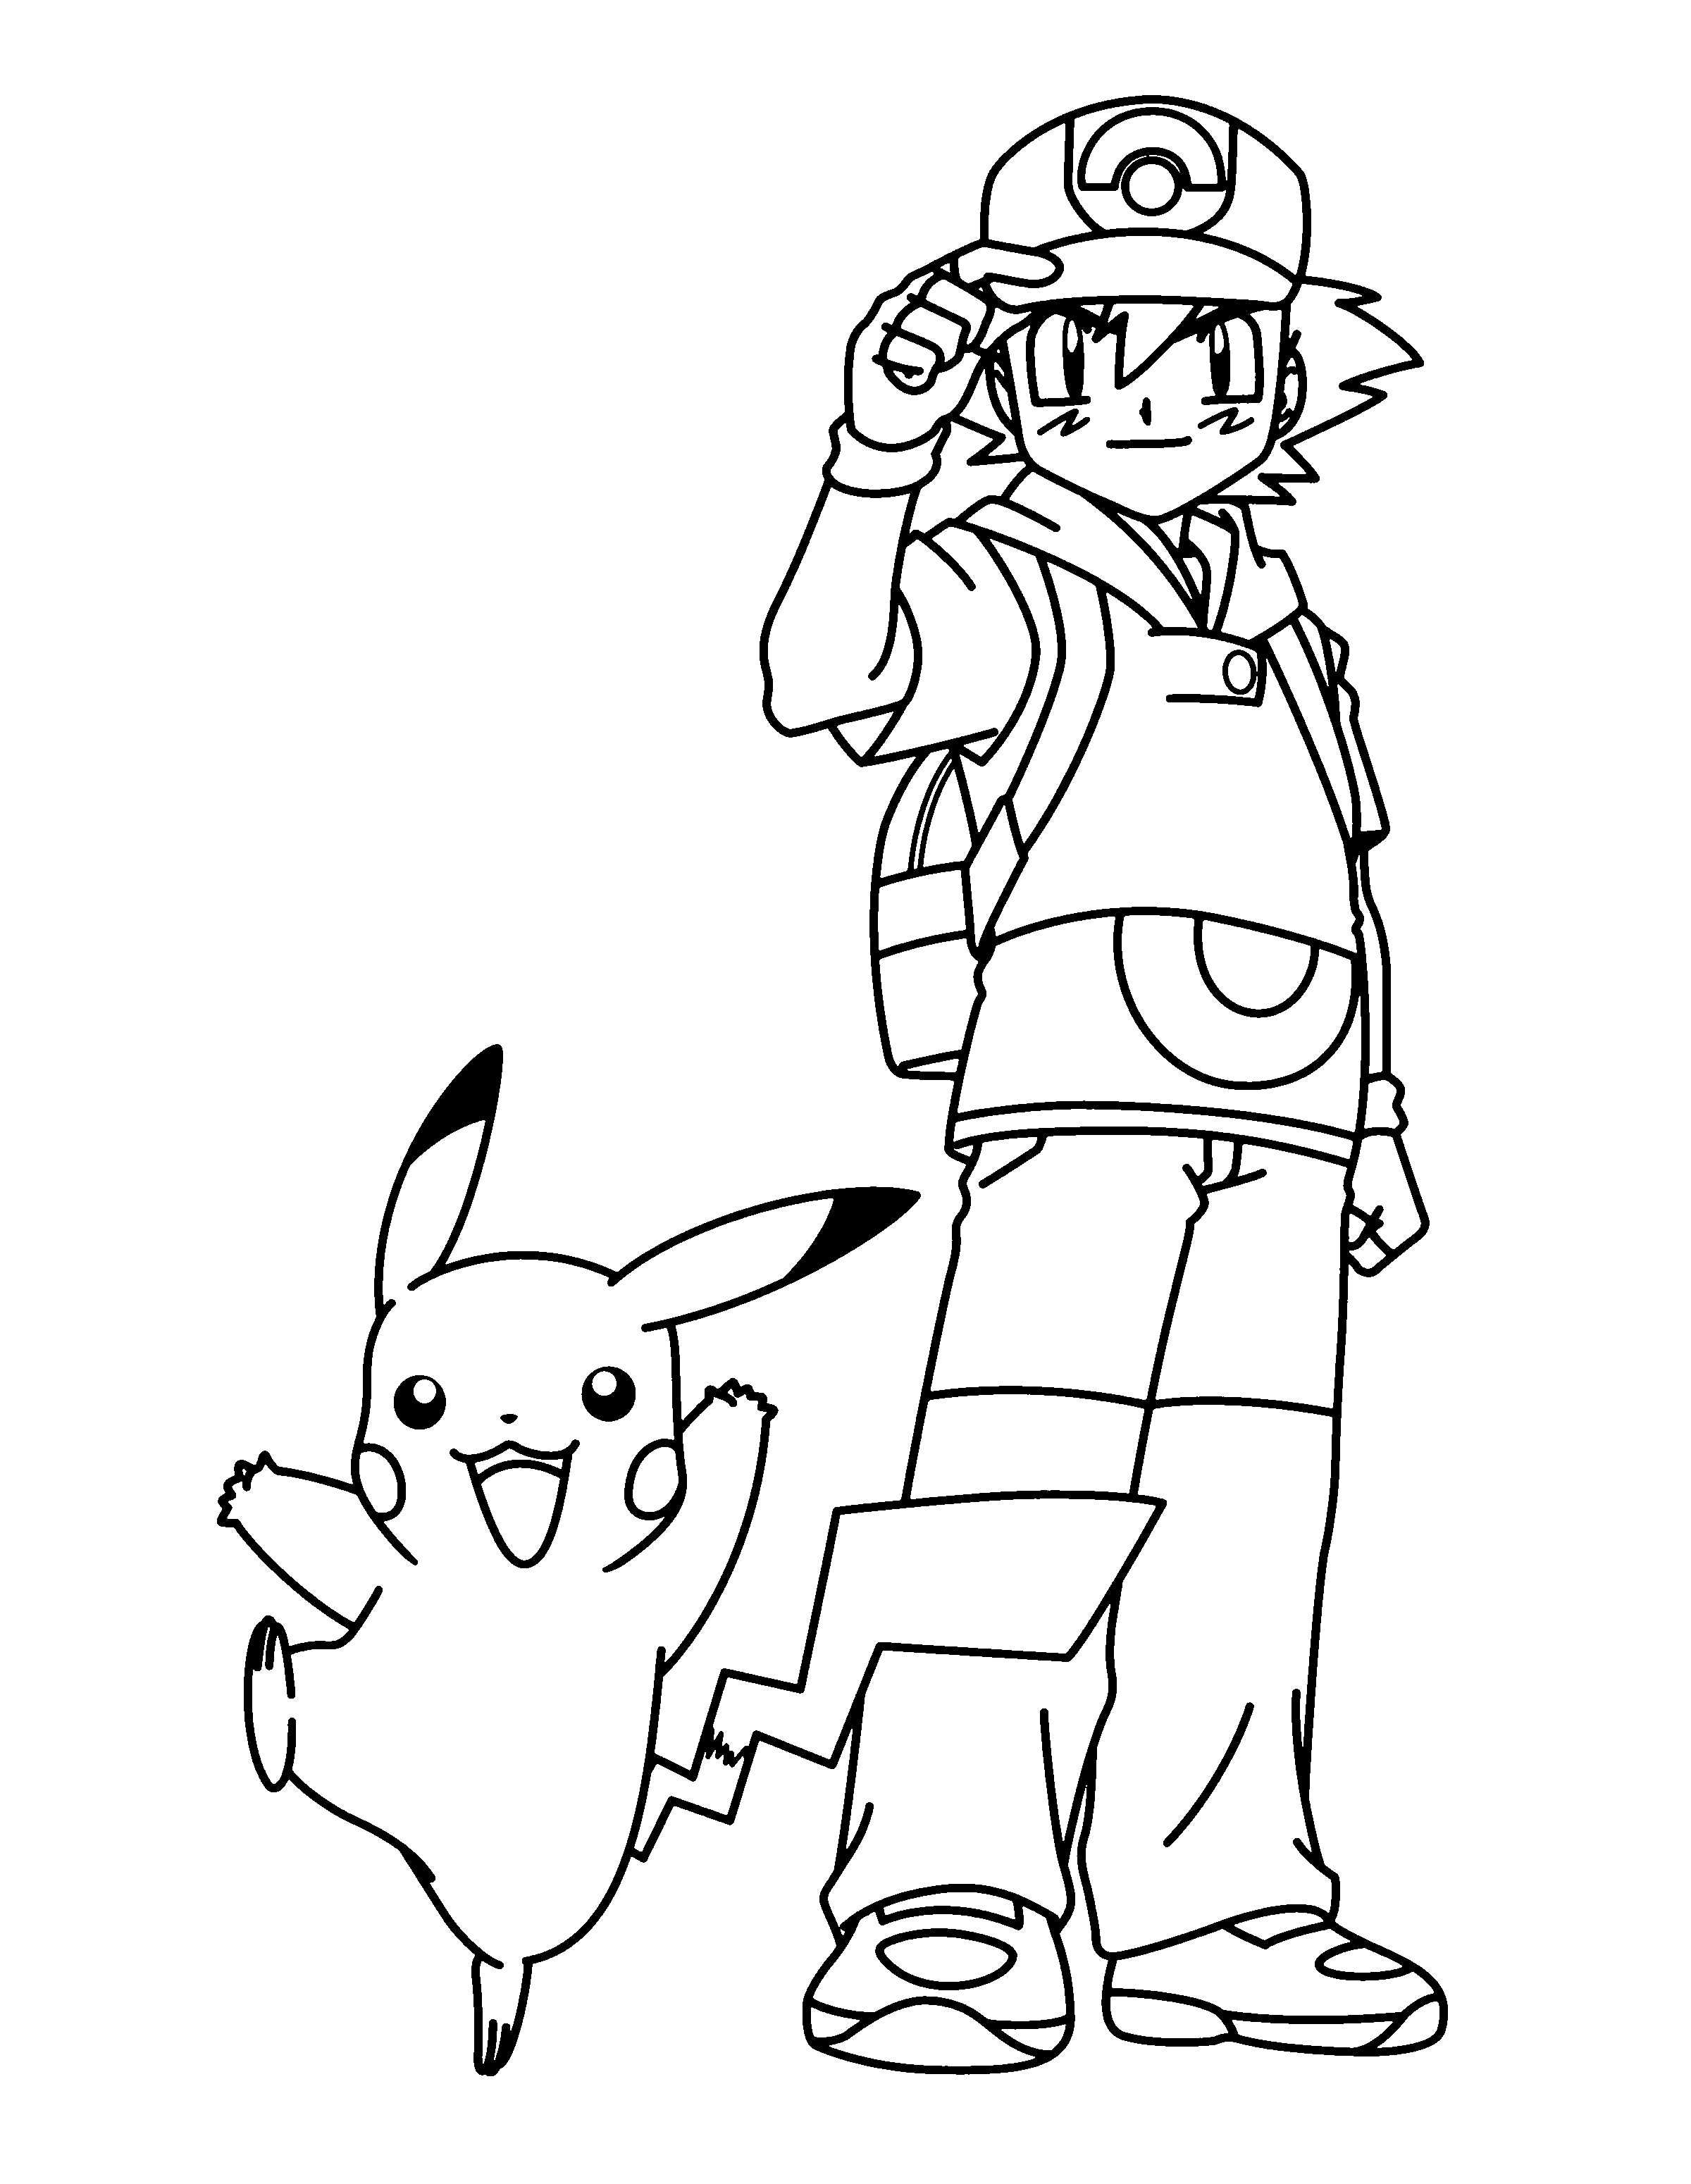 Pokemon Coloring Pages. Join your favorite Pokemon on an